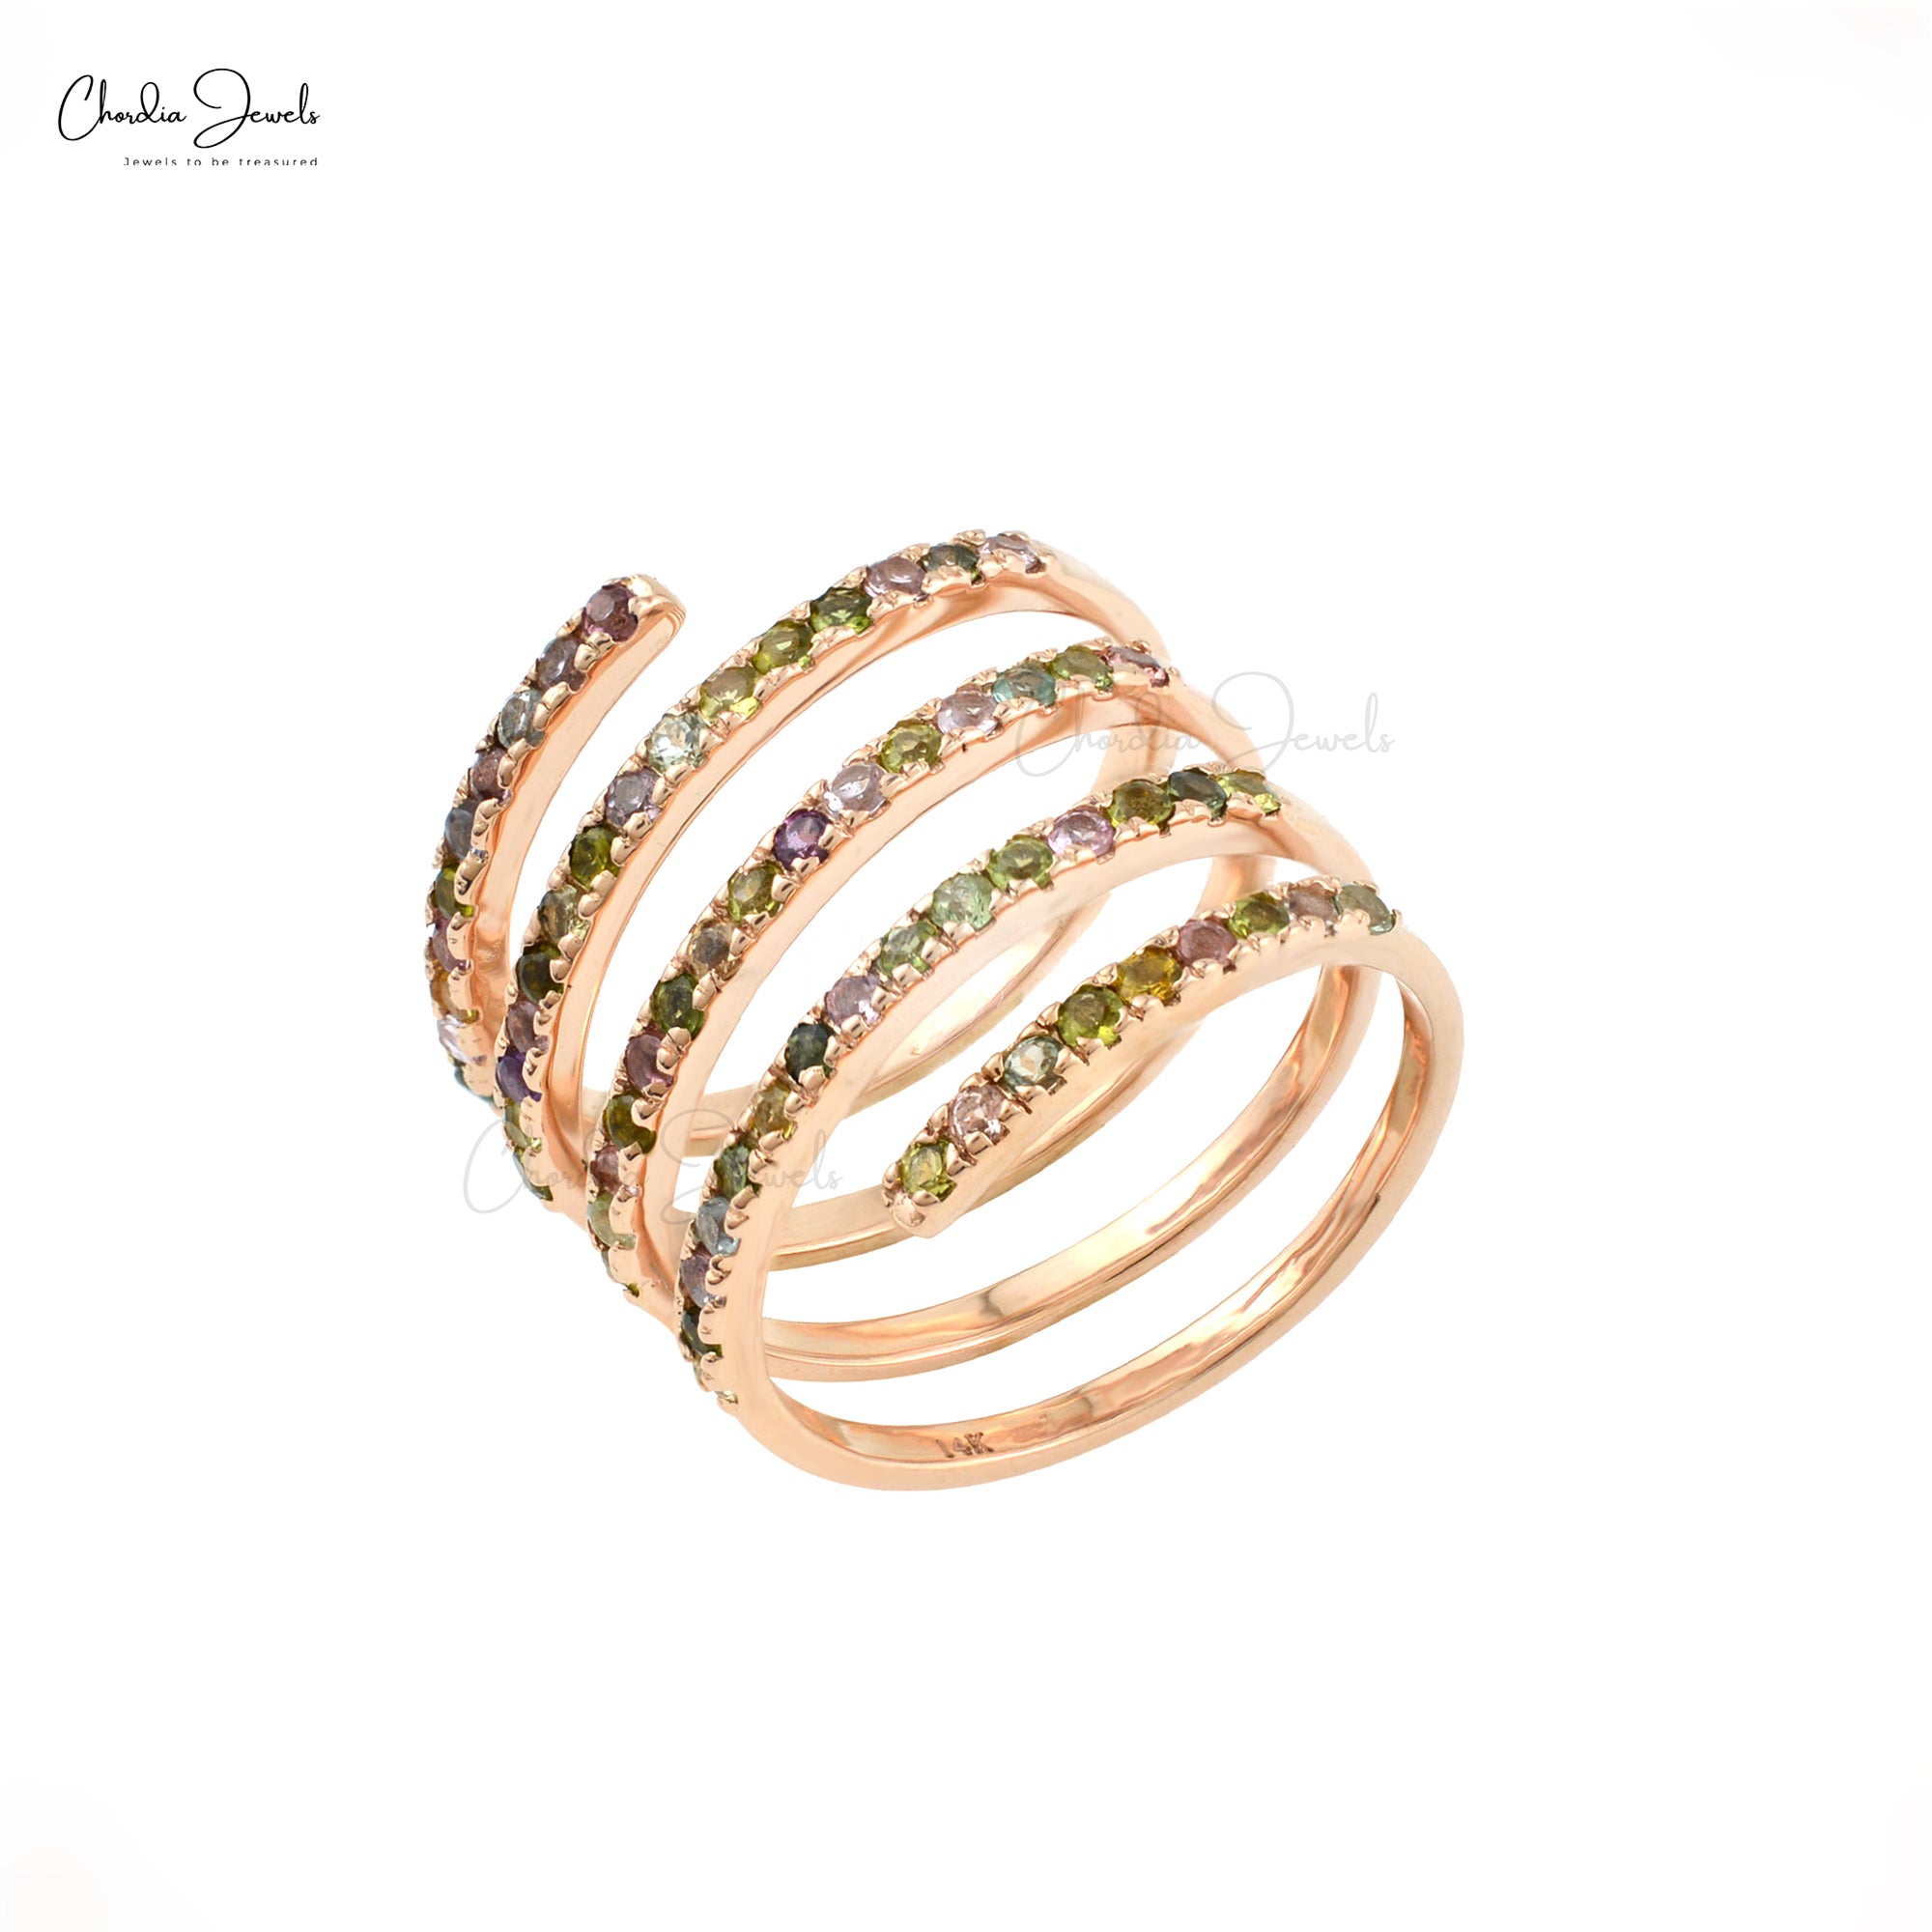 Multi Stone Eternity Wedding Bands in 14k Solid Gold At Chordia Jewels